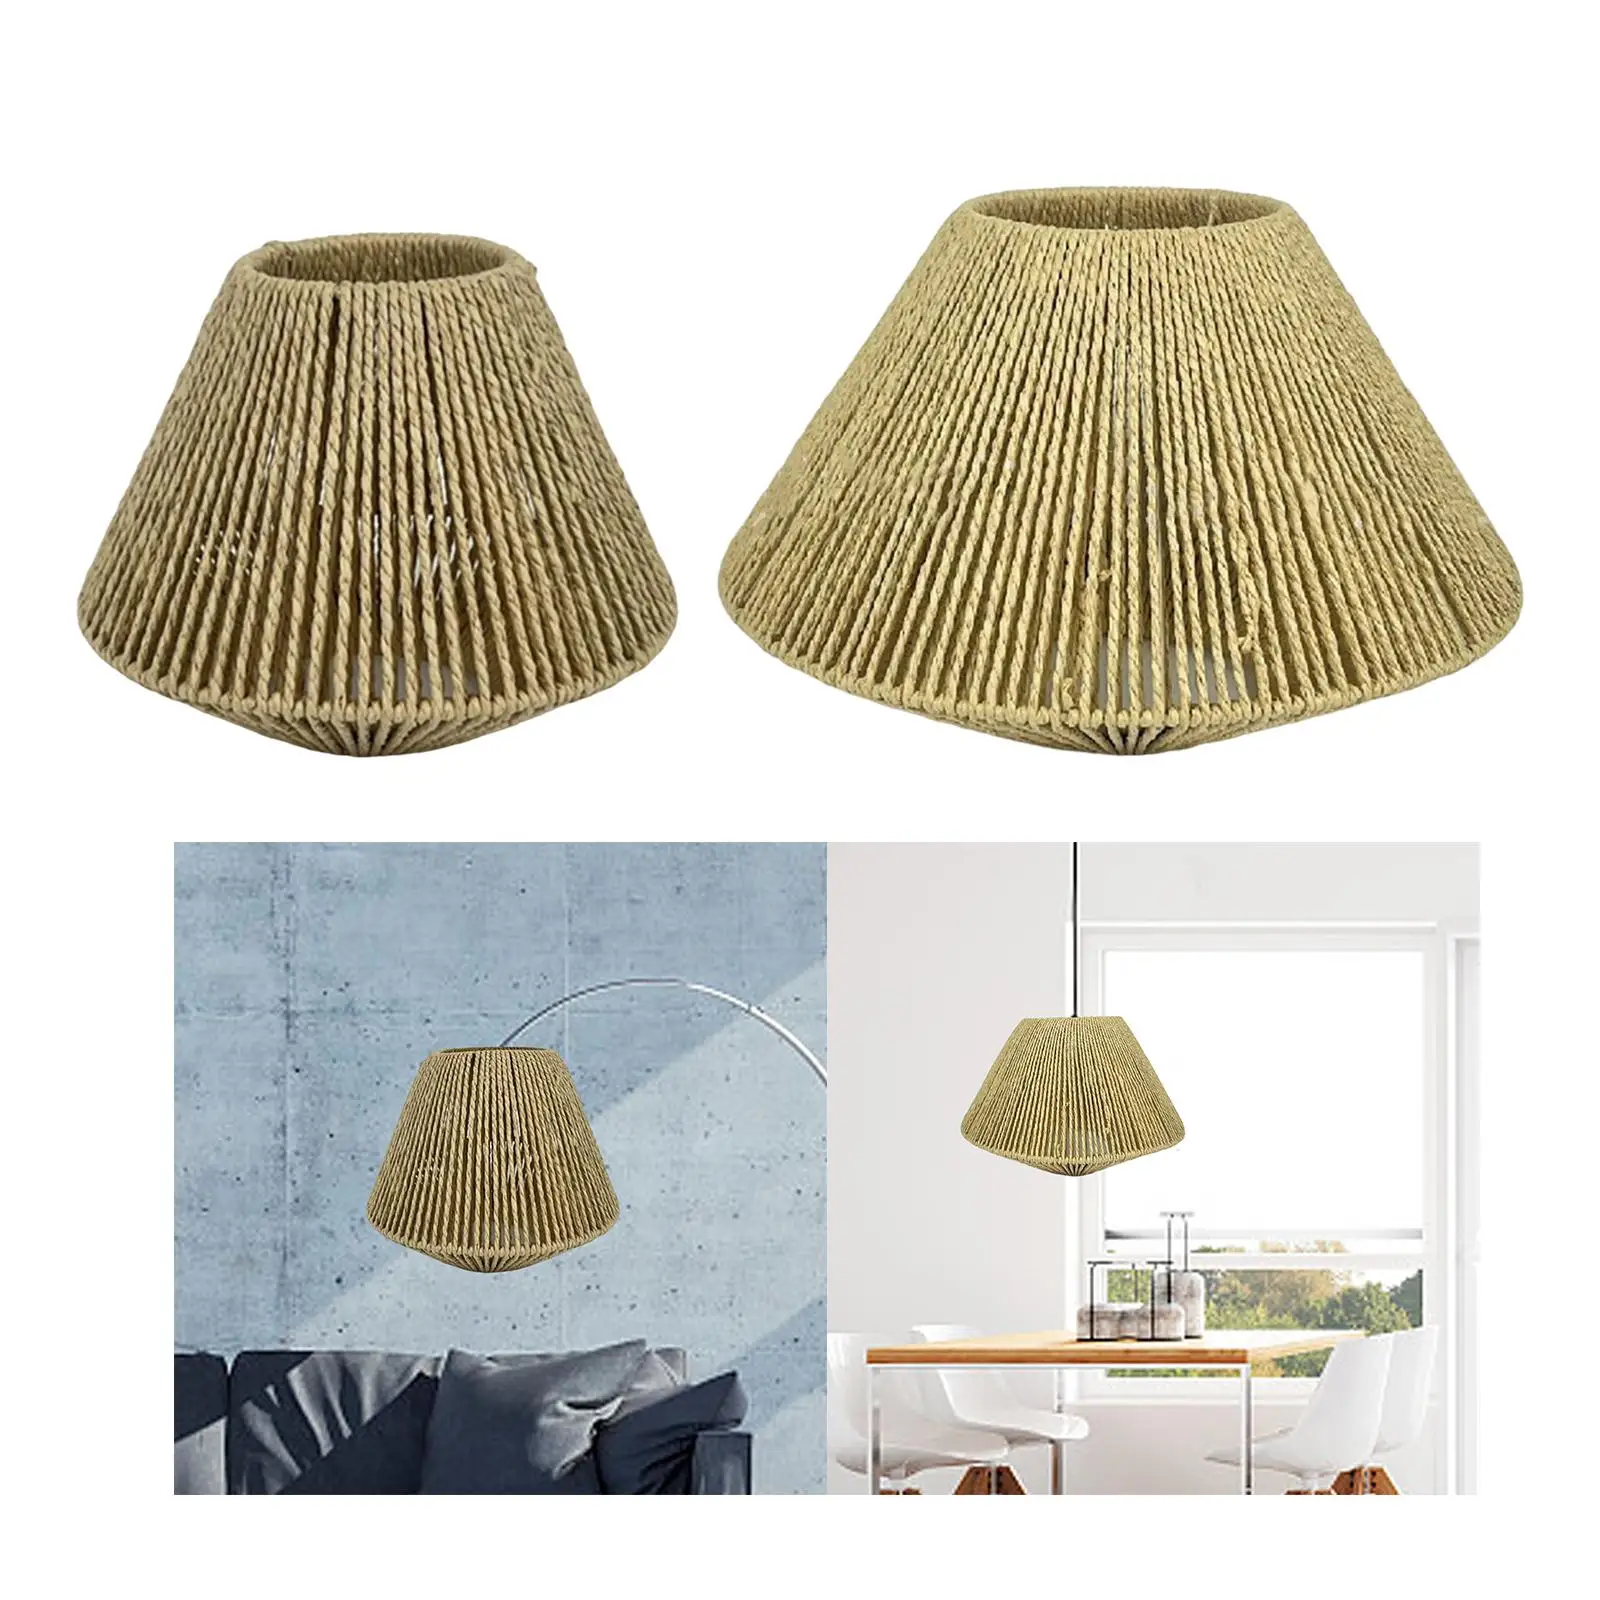 Rustic Chandelier Cover Light Cover Replacement Removable Handwoven Lampshade for Dining Room Restaurant Bedroom Bar Decor